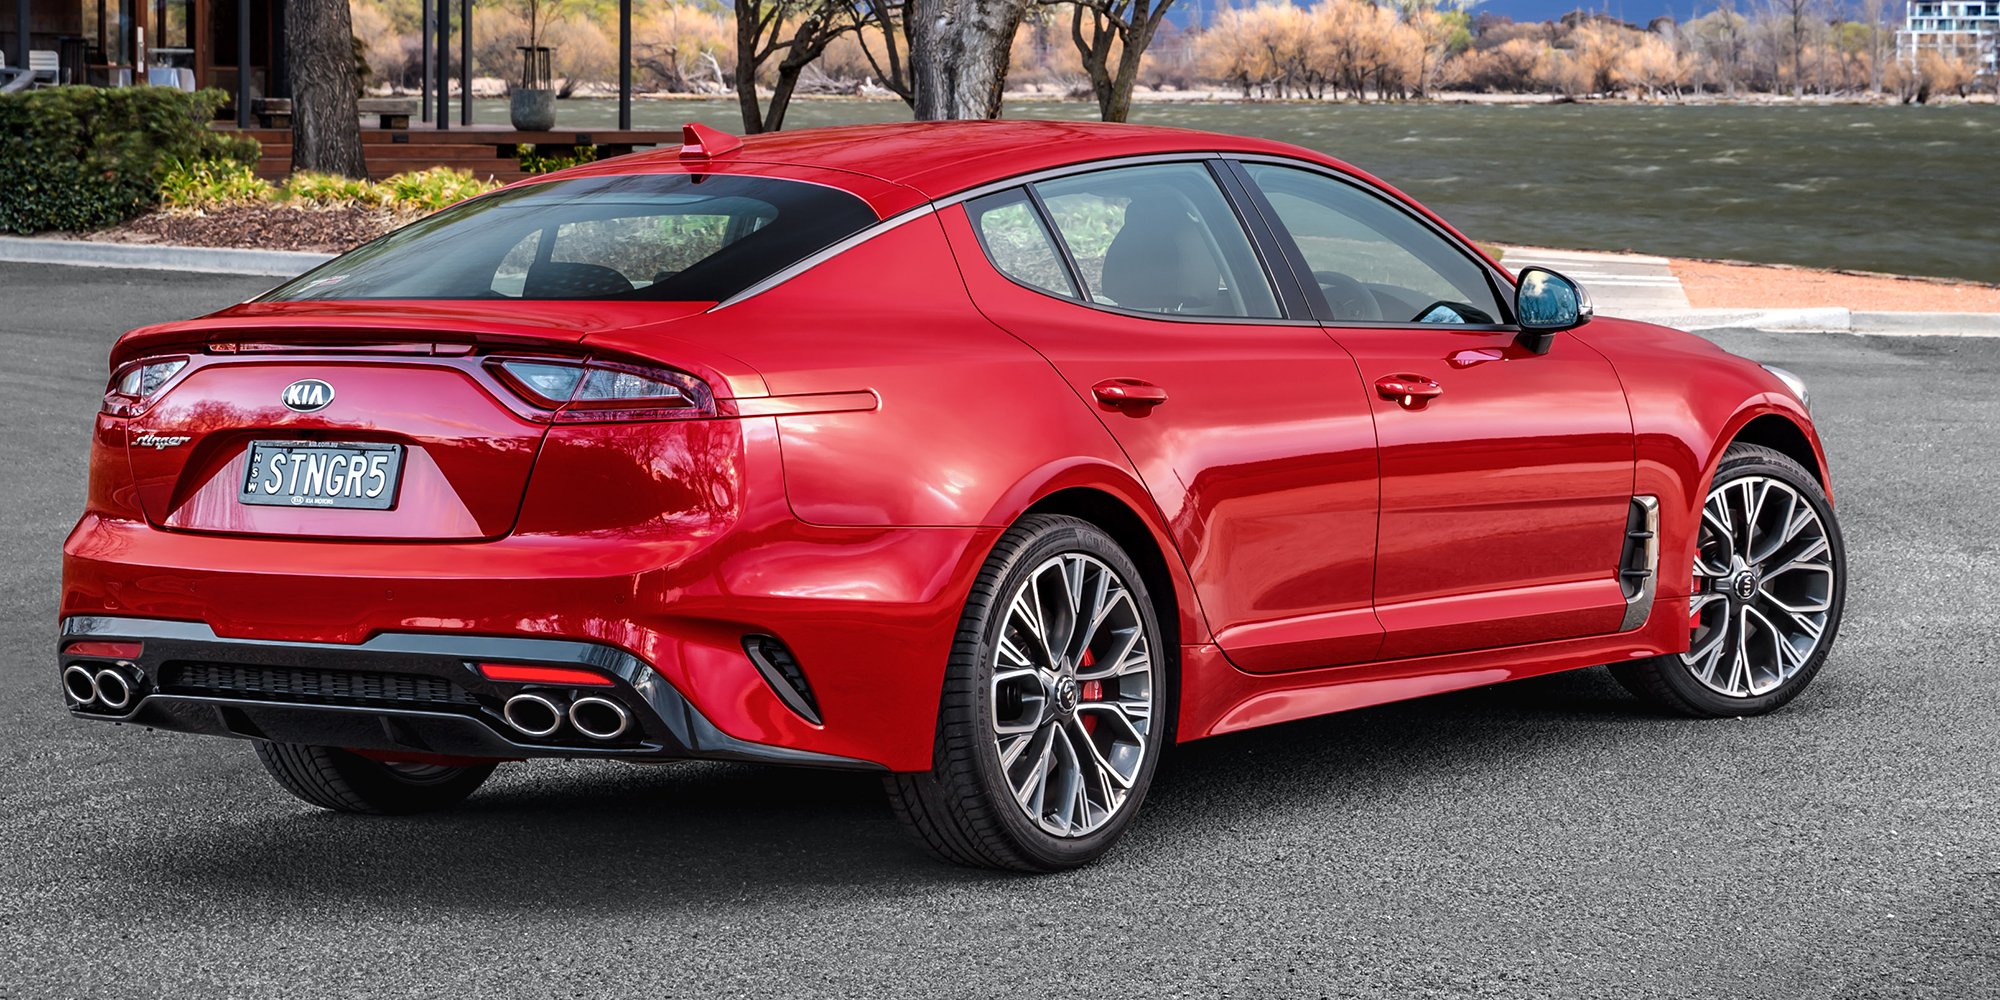 2018 Kia Stinger pricing and specs UPDATE Photos (1 of 36)